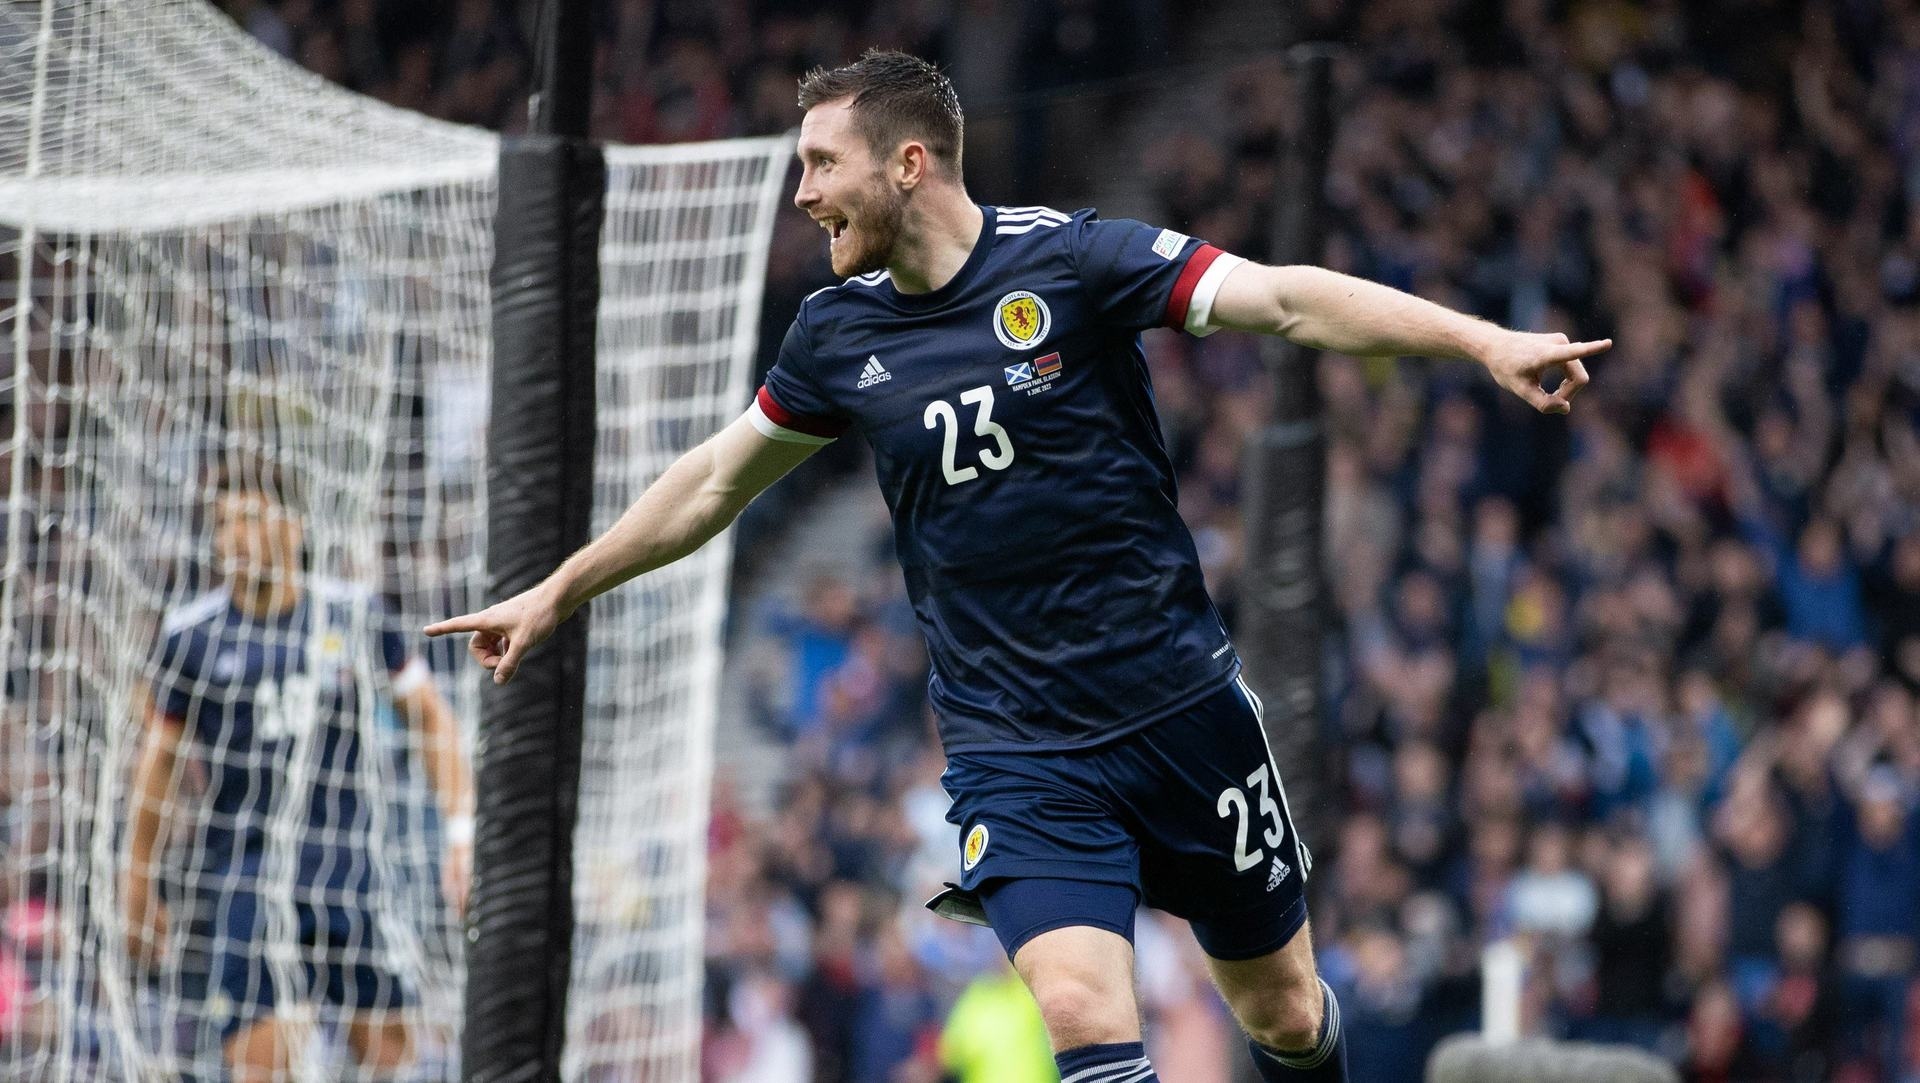 Anthony Ralston's goal helped Scotland get their Nations League campaign off to a strong start.